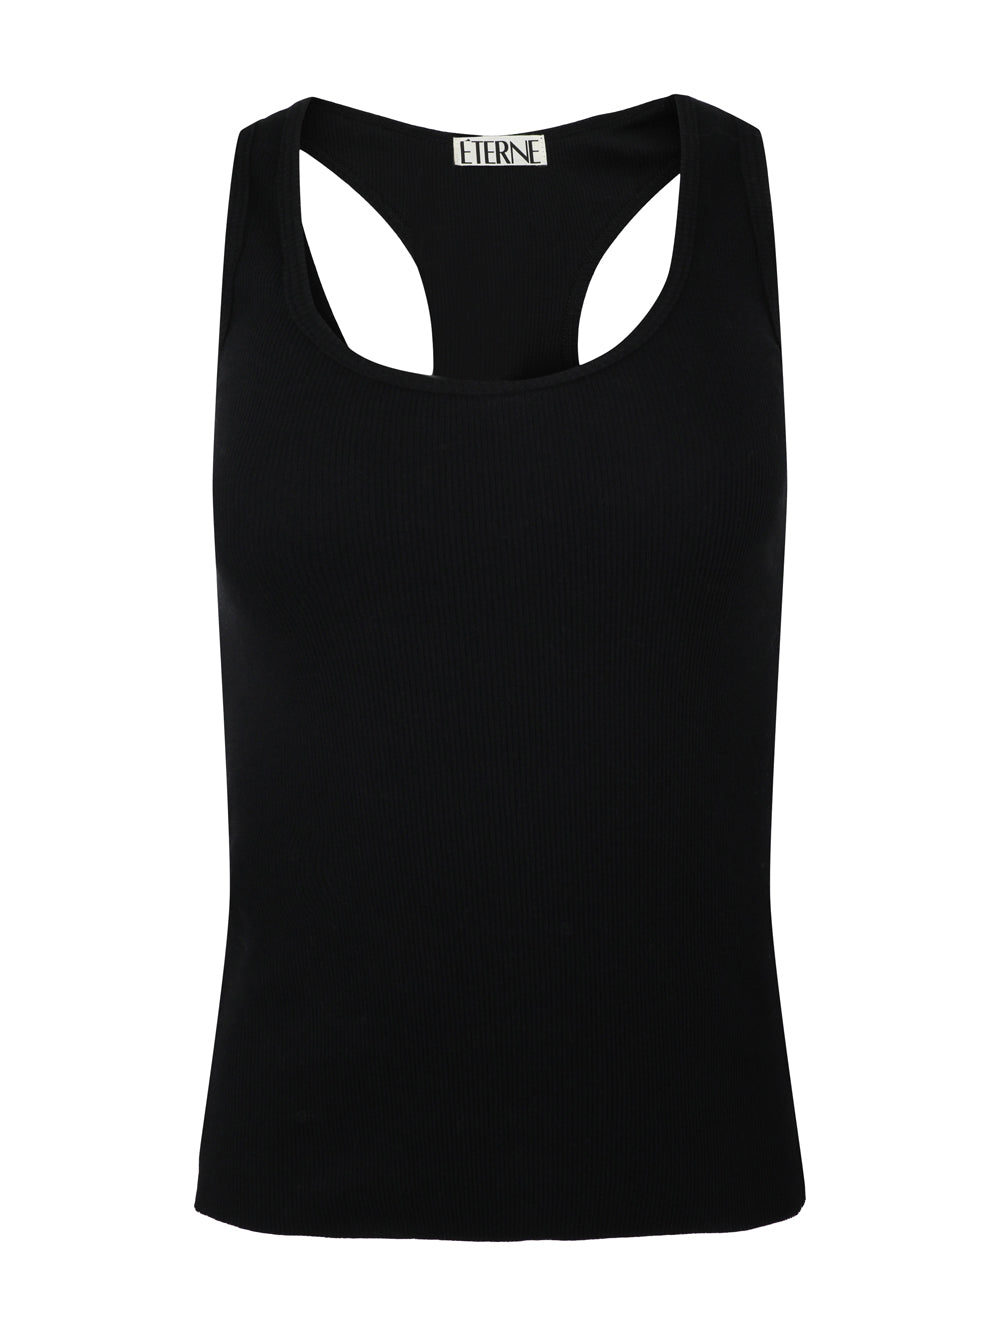 Thin Strap Fitted Tank Top - ETERNE